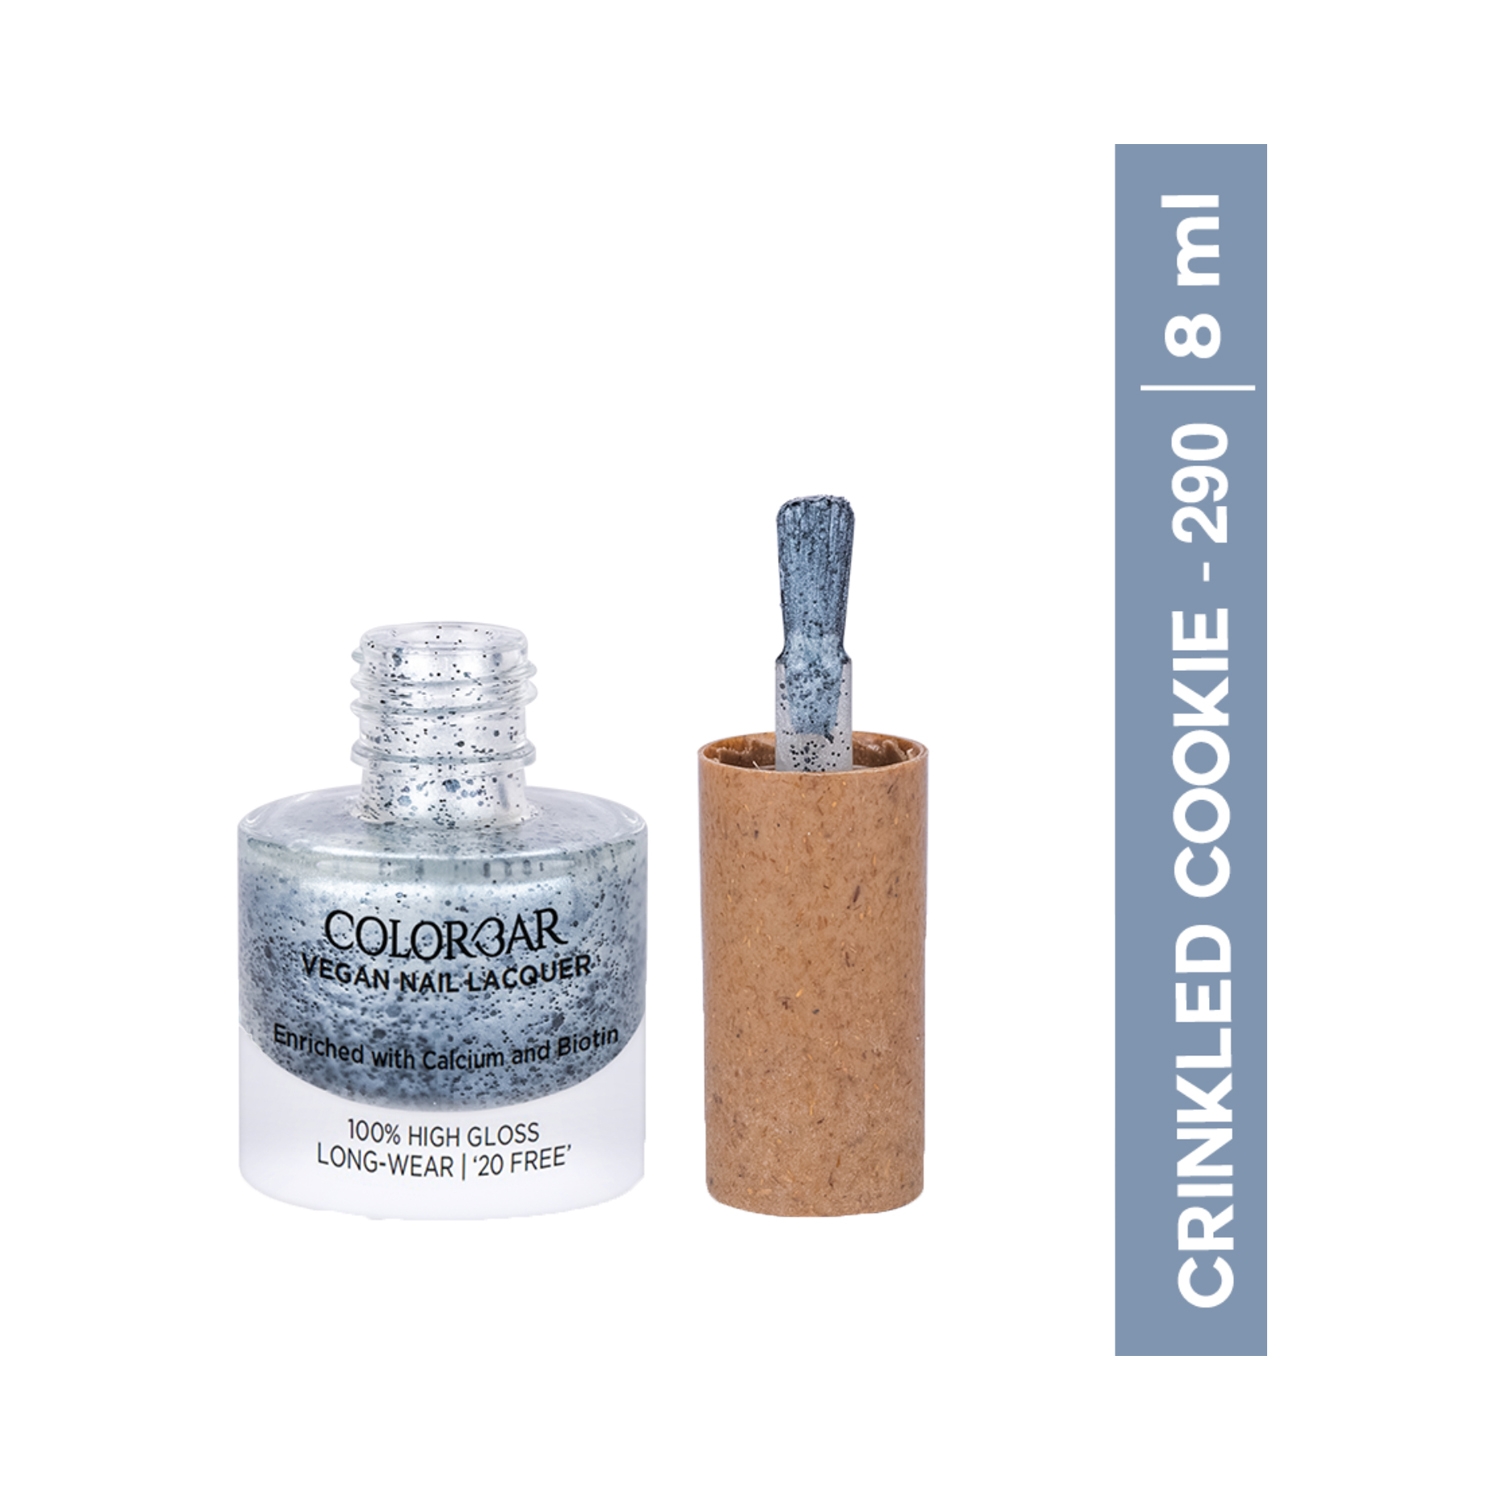 Colorbar | Colorbar Vegan Nail Lacquer - 290 Crinkled Cookie (8 ml)